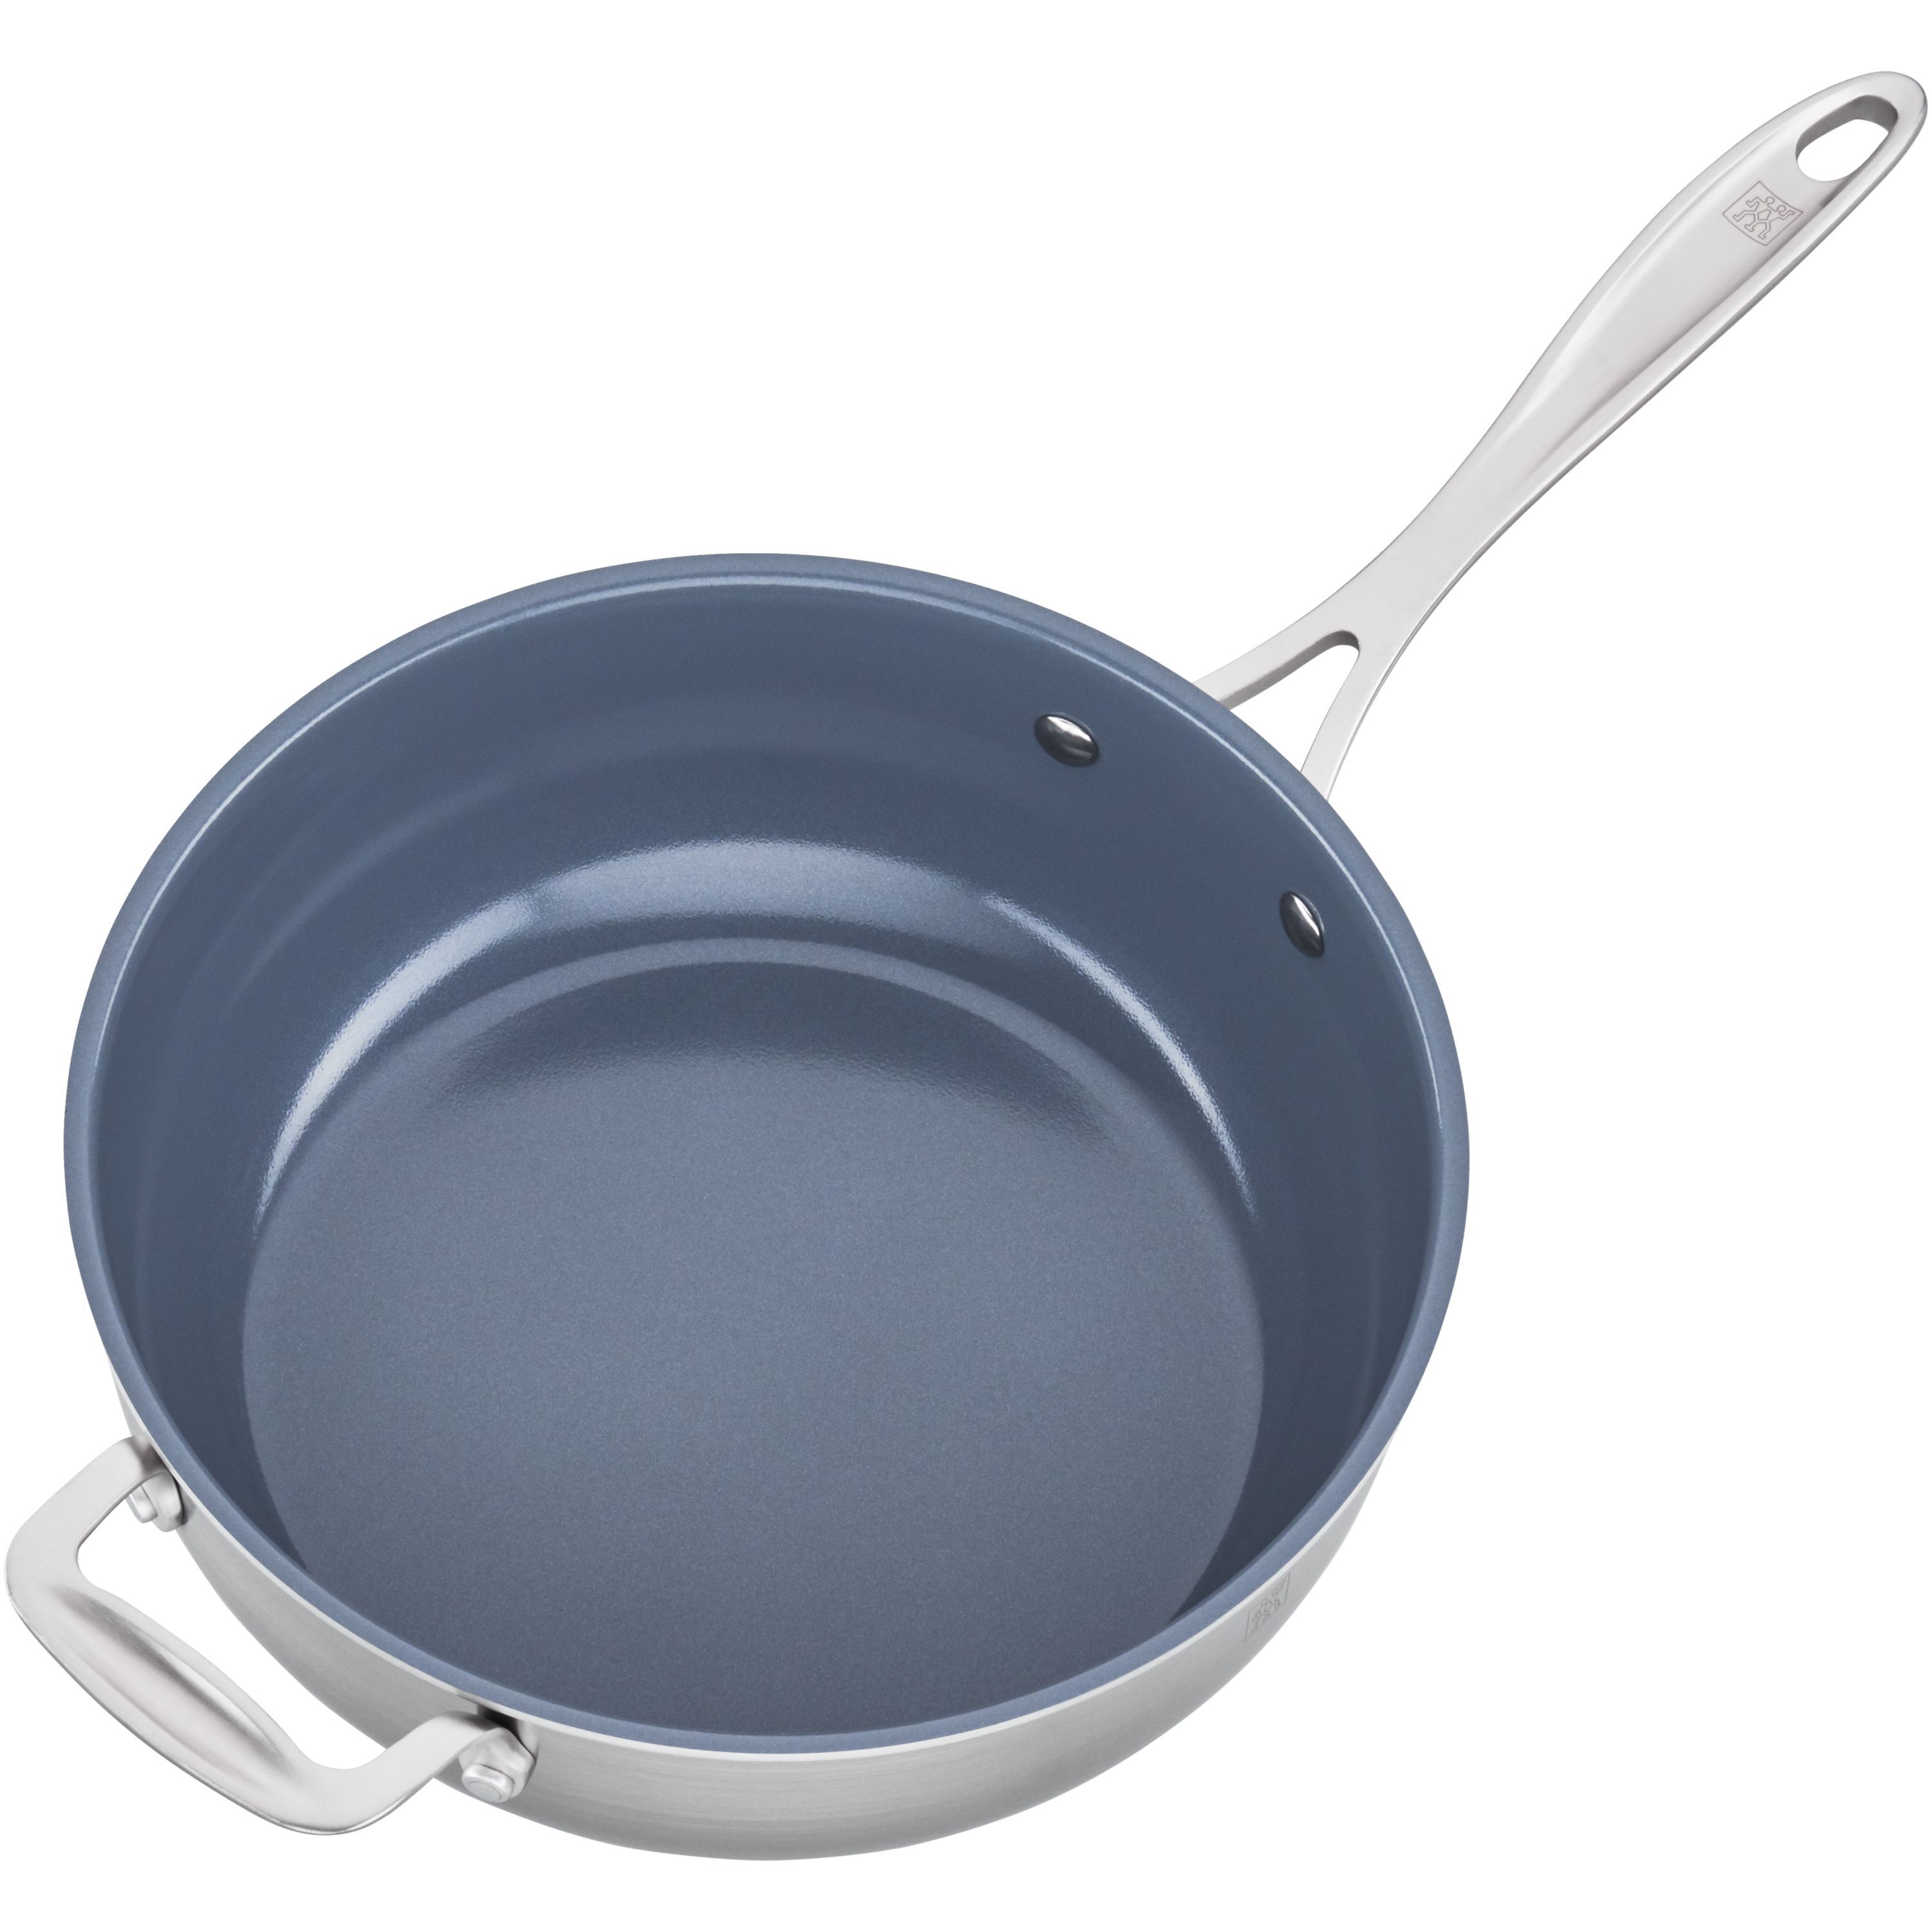 4.6-qt ZWILLING 64081-260 Spirit Ceramic Nonstick Perfect Pan Stainless Steel